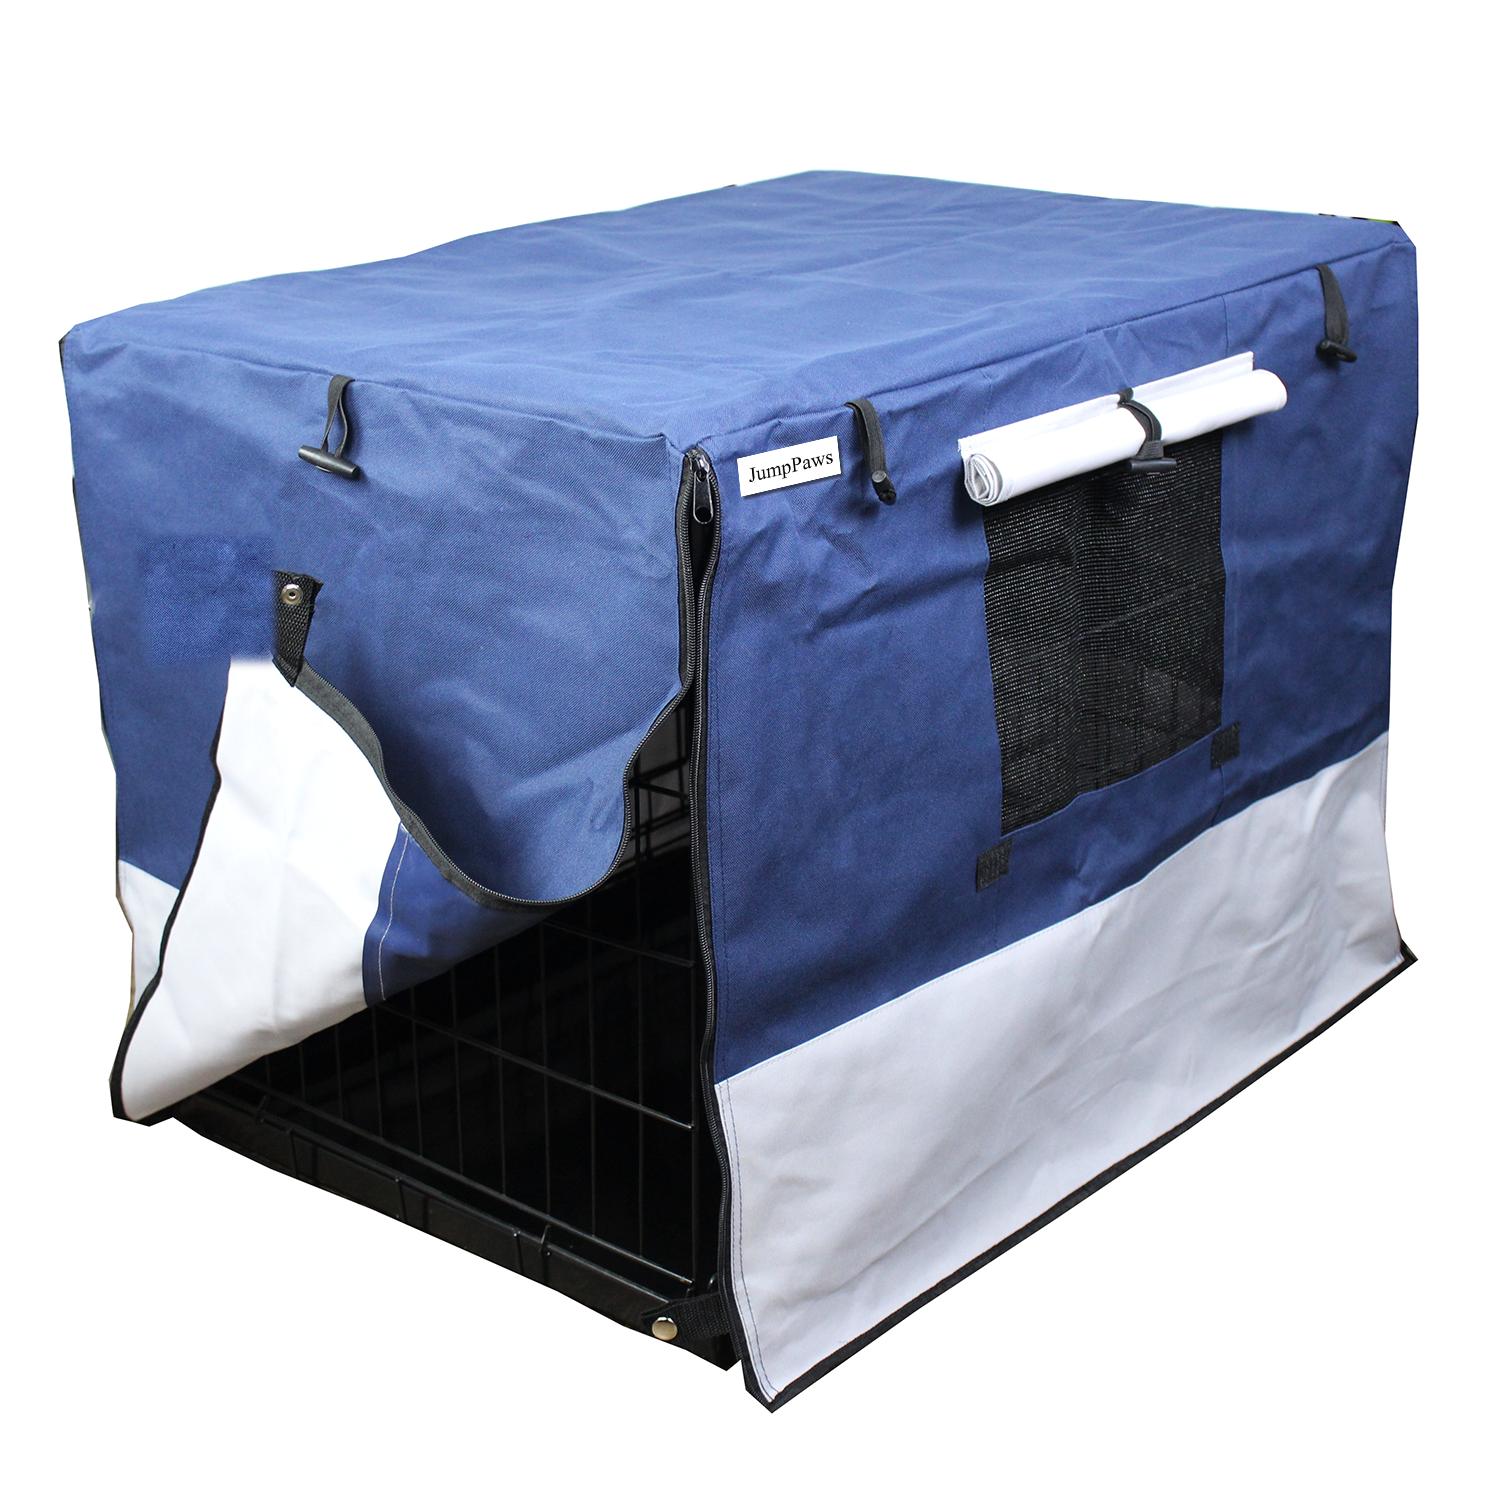 JumpPaws Dog Crate Cover, for 36 Inch Kennel for Medium Dog, with Mesh Window, Blue, 37''L x 25''W x 28''H